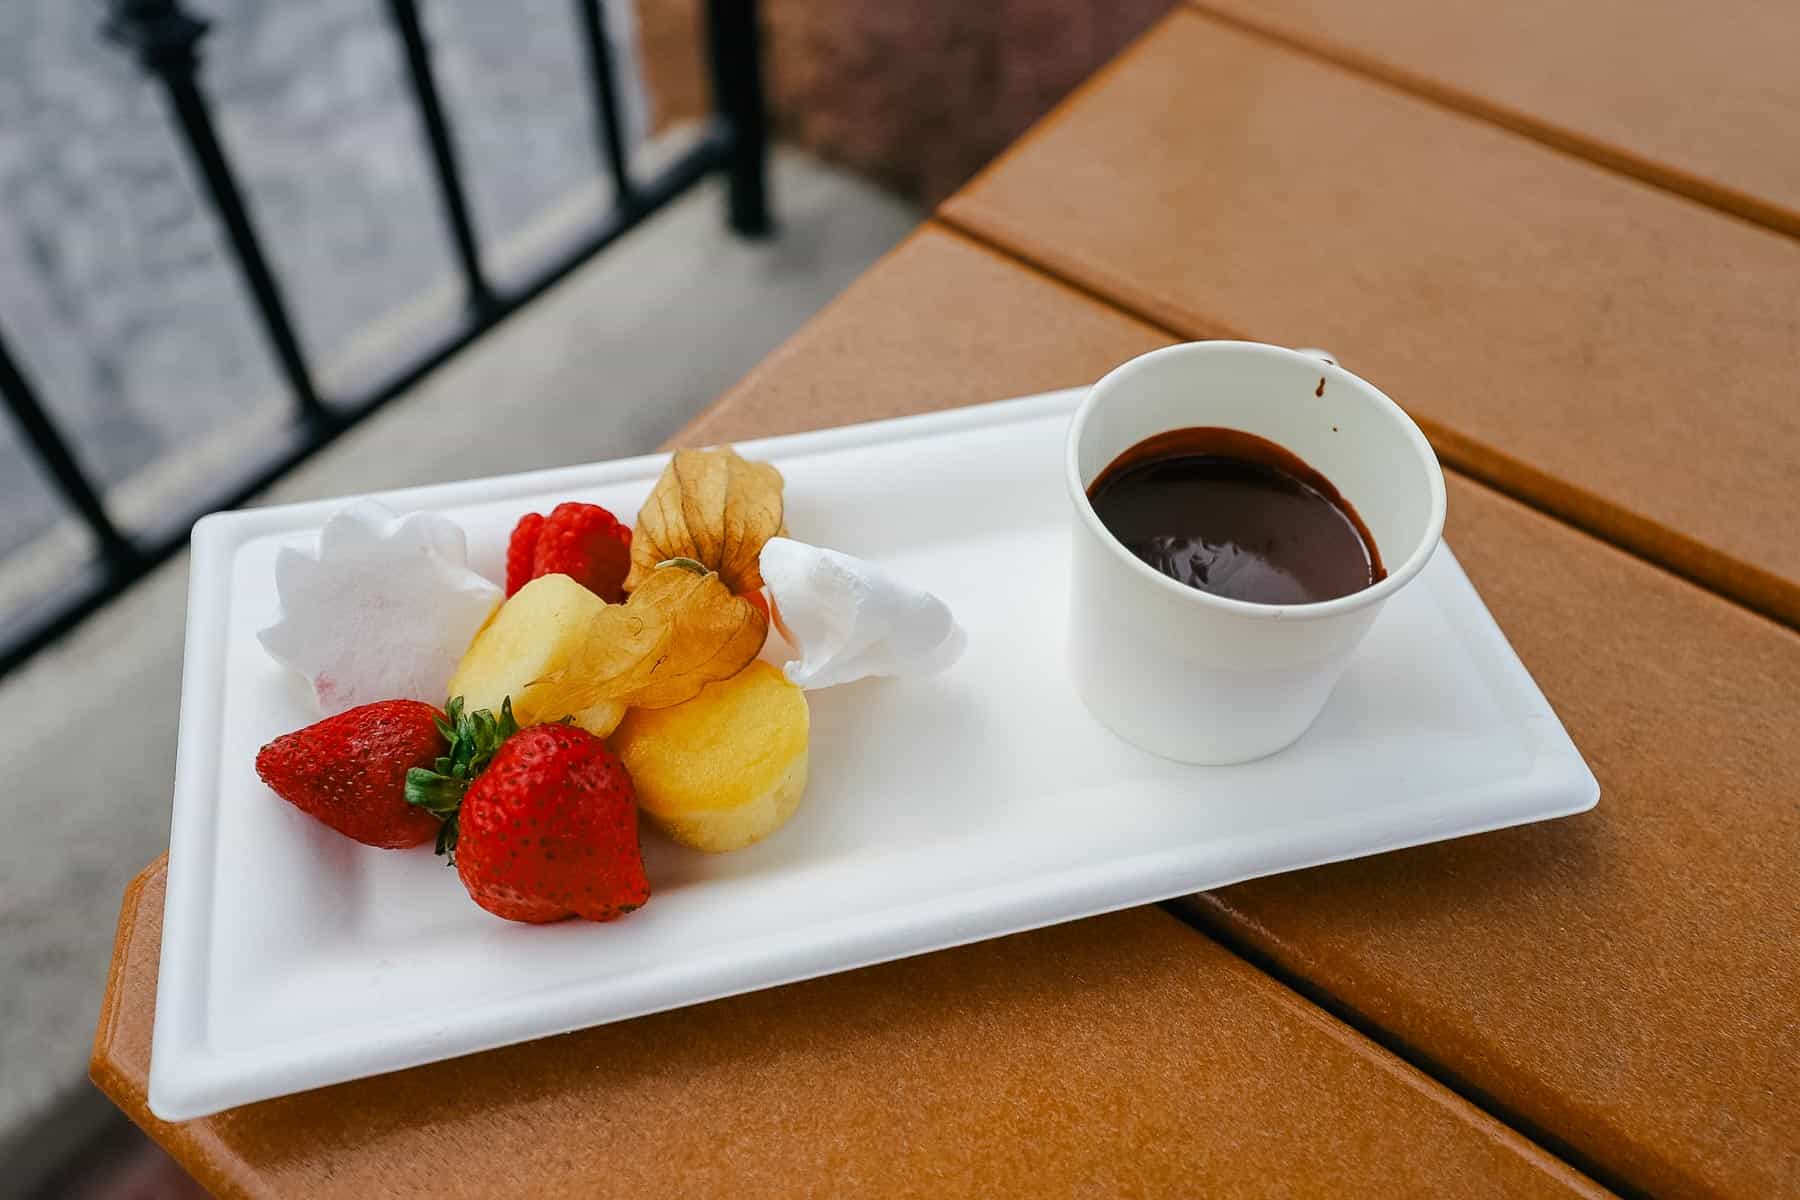 The Alps chocolate fondue at Epcot Food and Wine.